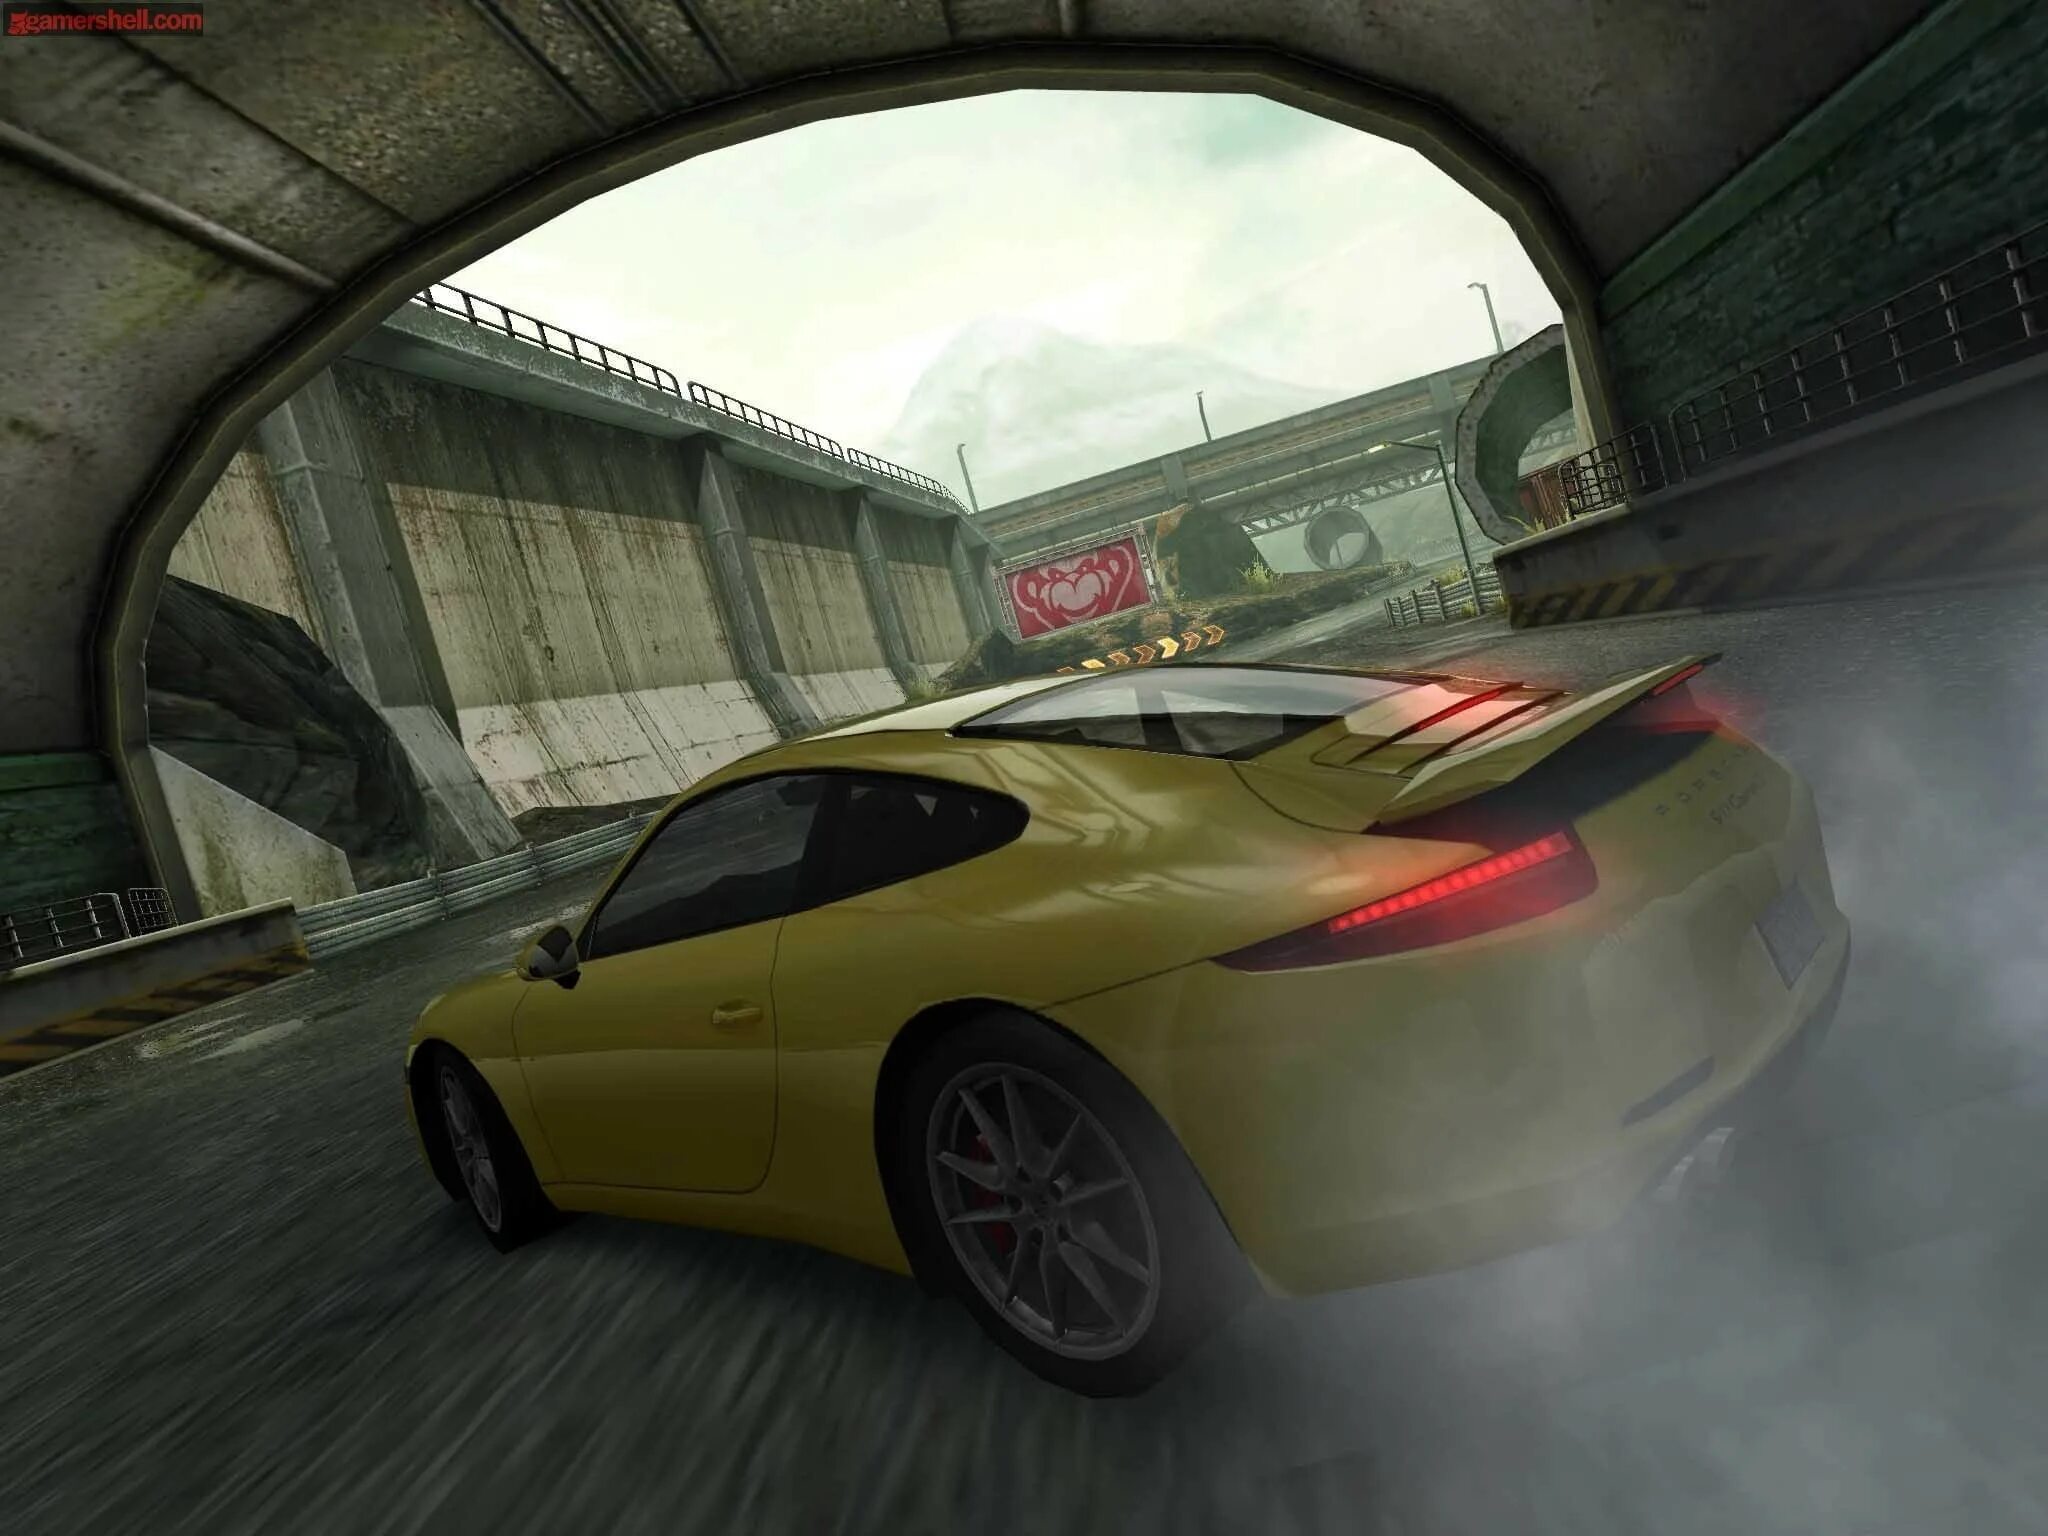 Need for Speed most wanted 2012. NFS MW 2012 Android. NFS most wanted 2012 IOS. Нид фор СПИД мост вонтед2012. Nfs mw 2